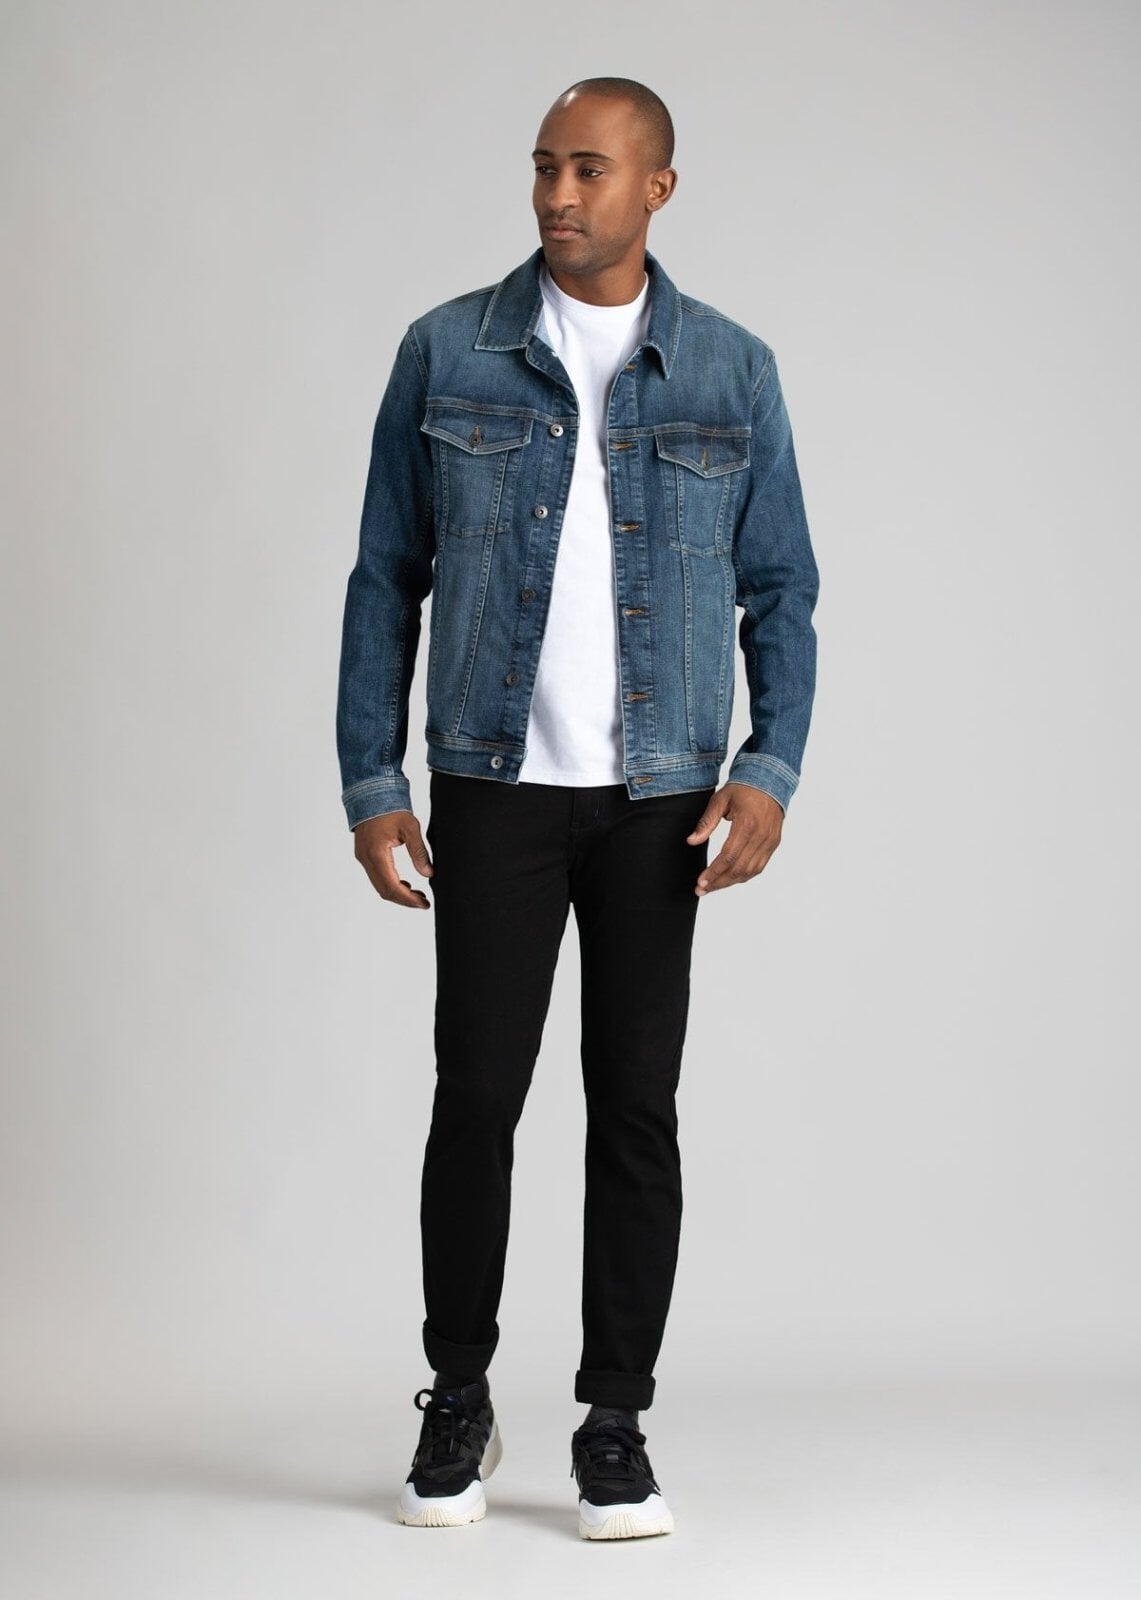 man wearing water resistant stretch jeans with a denim jacket